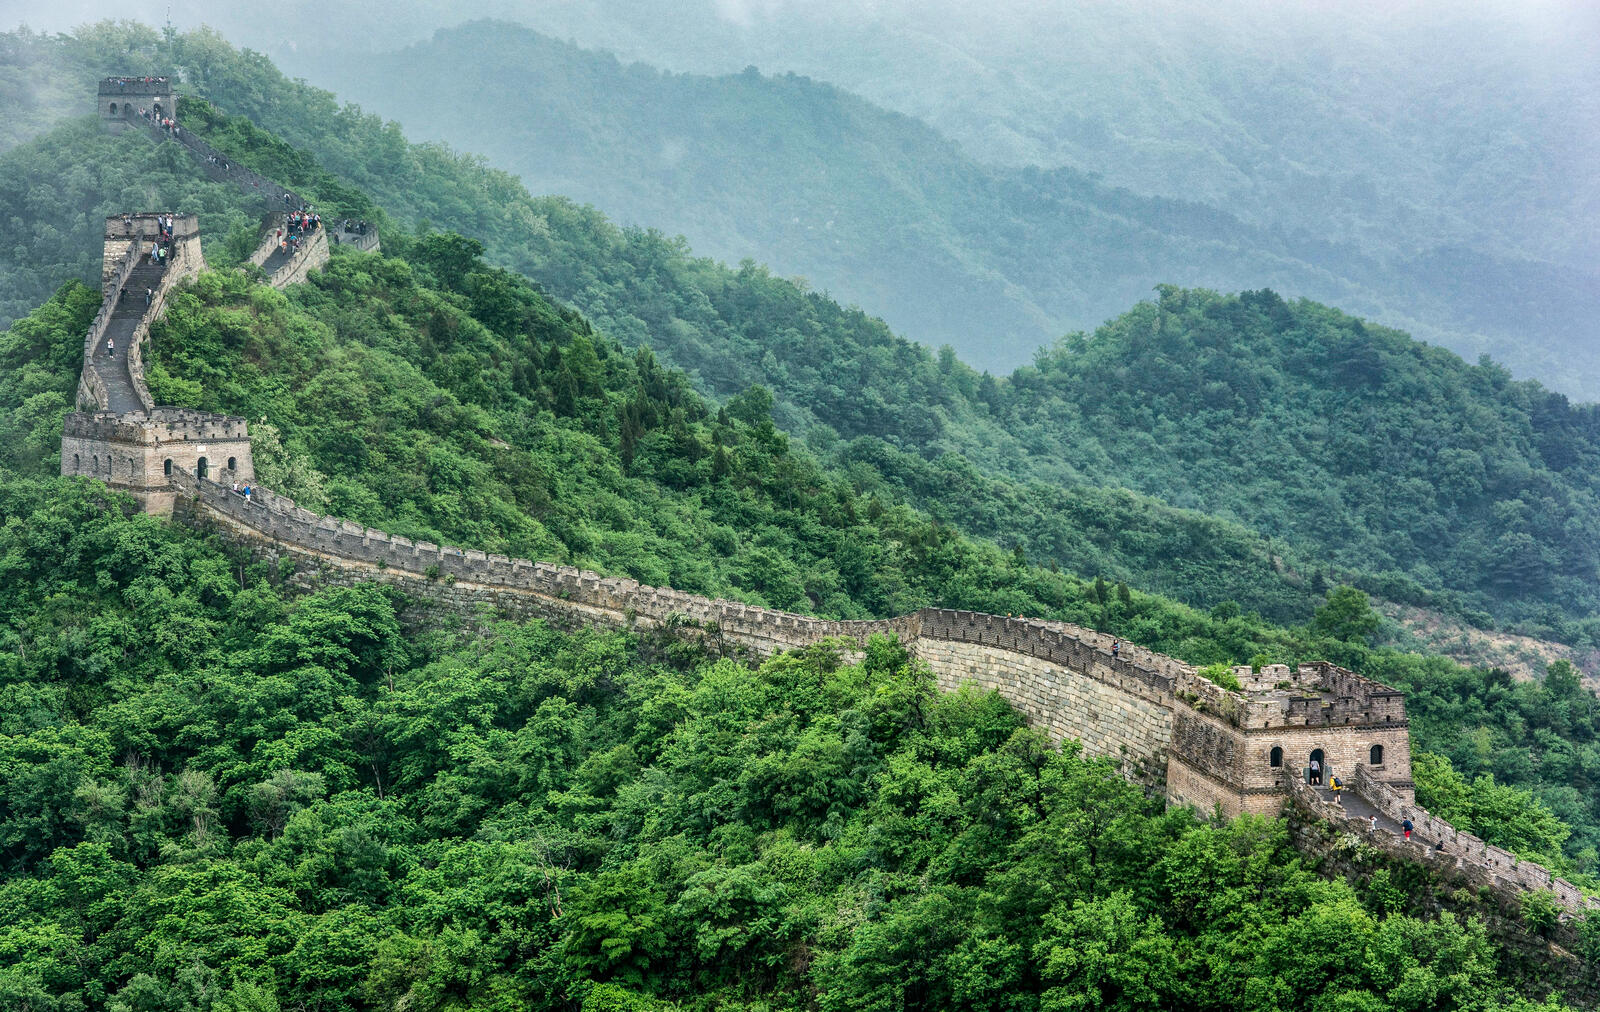 Wallpapers The great wall of China the site Mutianyu near Beijing on the desktop